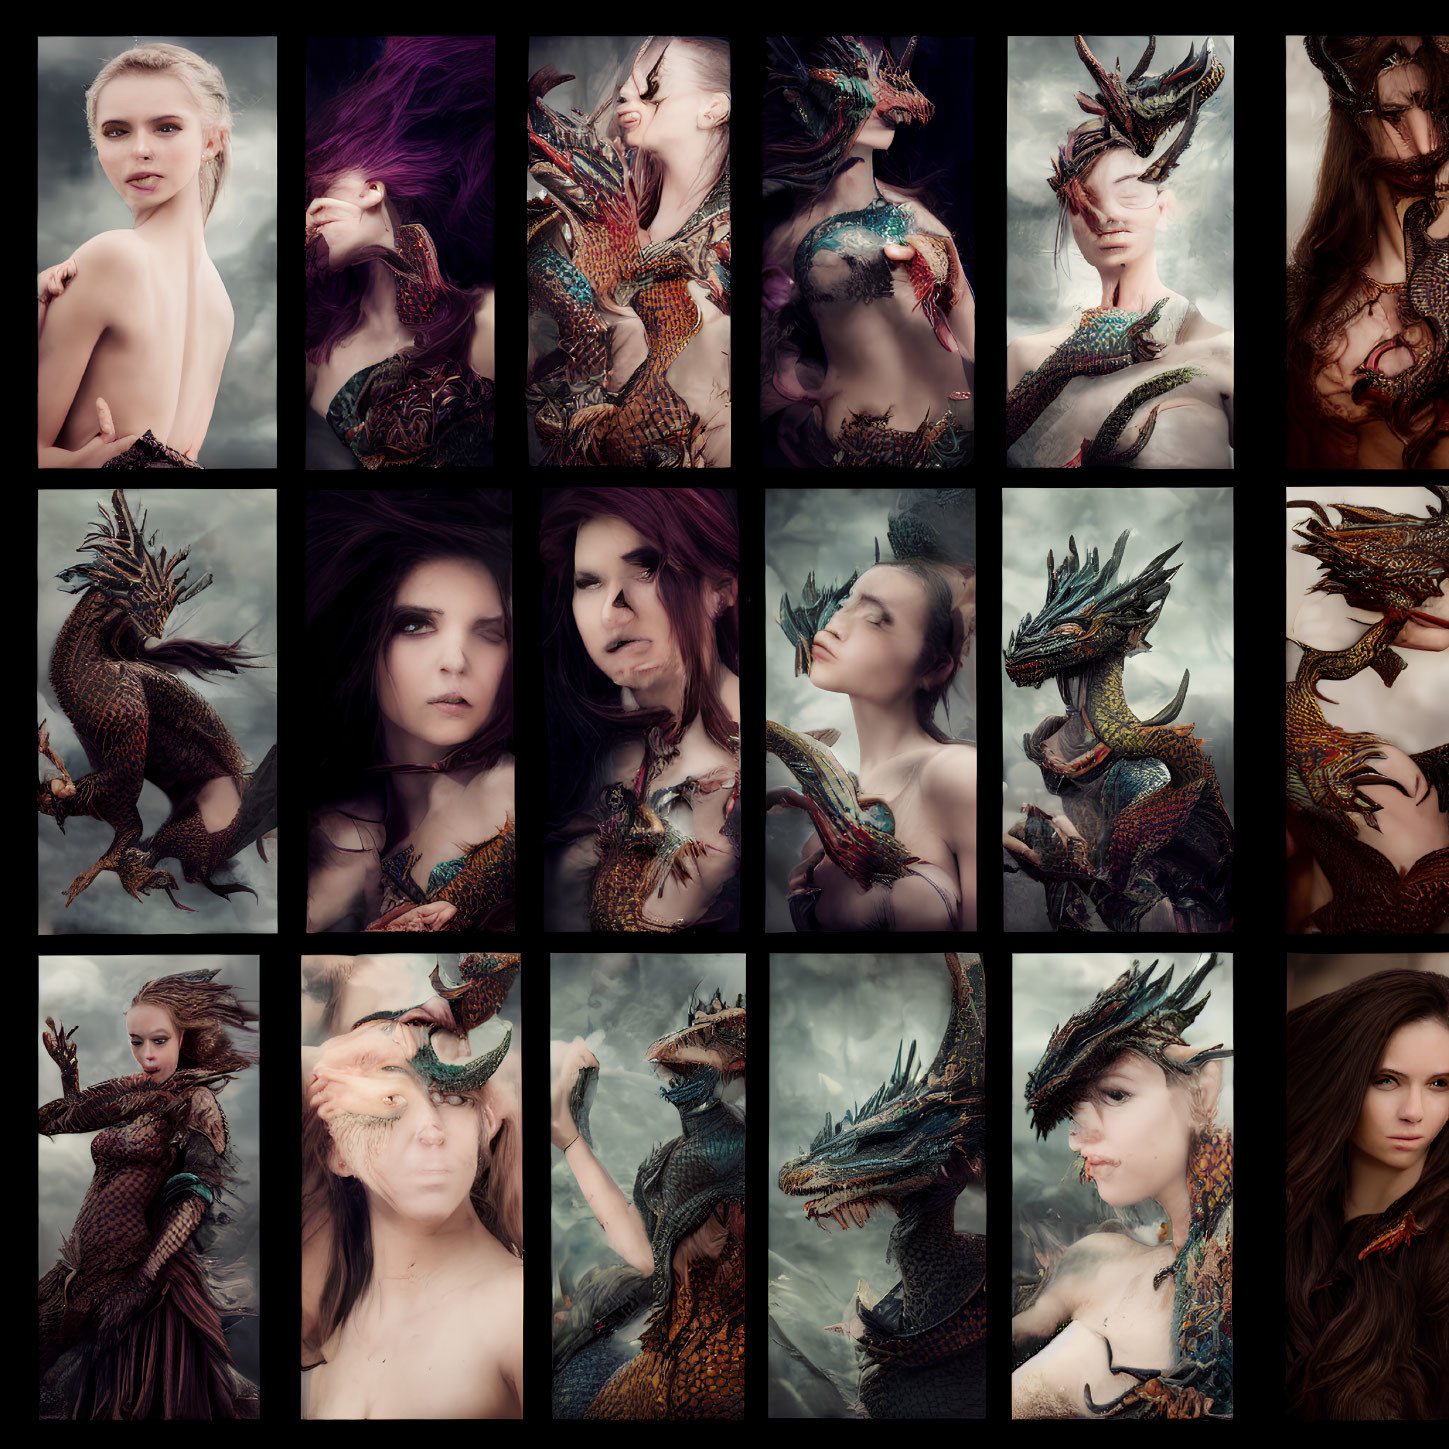 Fantasy-themed collage: Women with dragon attributes in artistic poses, muted colors, textured details